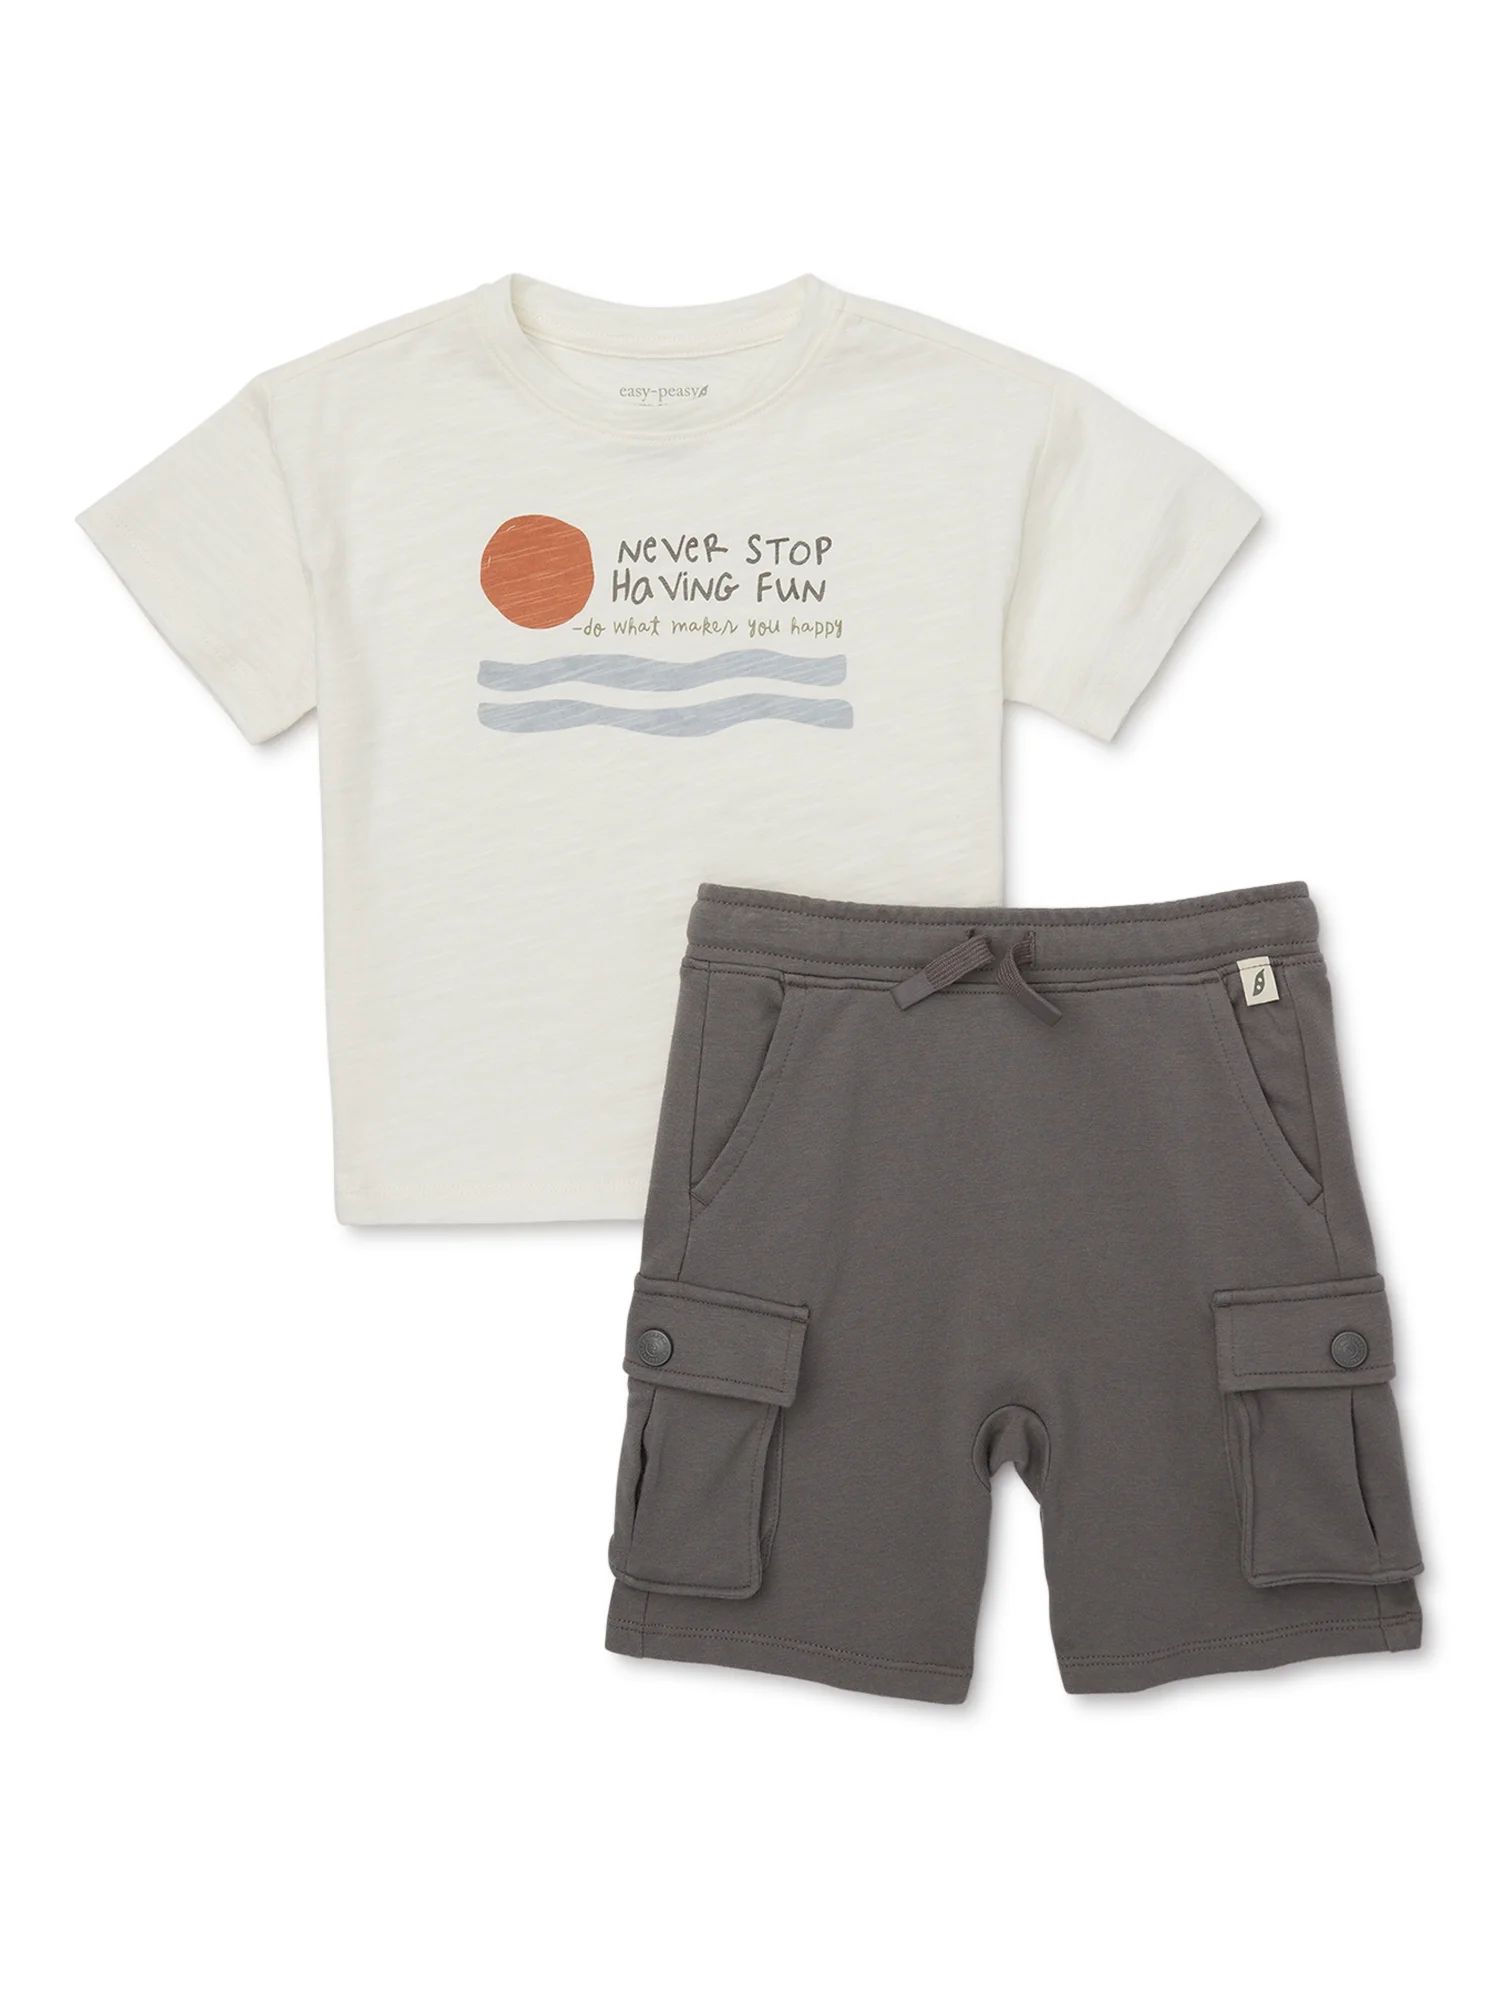 easy-peasy Toddler Boy Short Sleeve Tee and Cargo Short Outfit Set, 2-Piece, Sizes 18M-5T | Walmart (US)